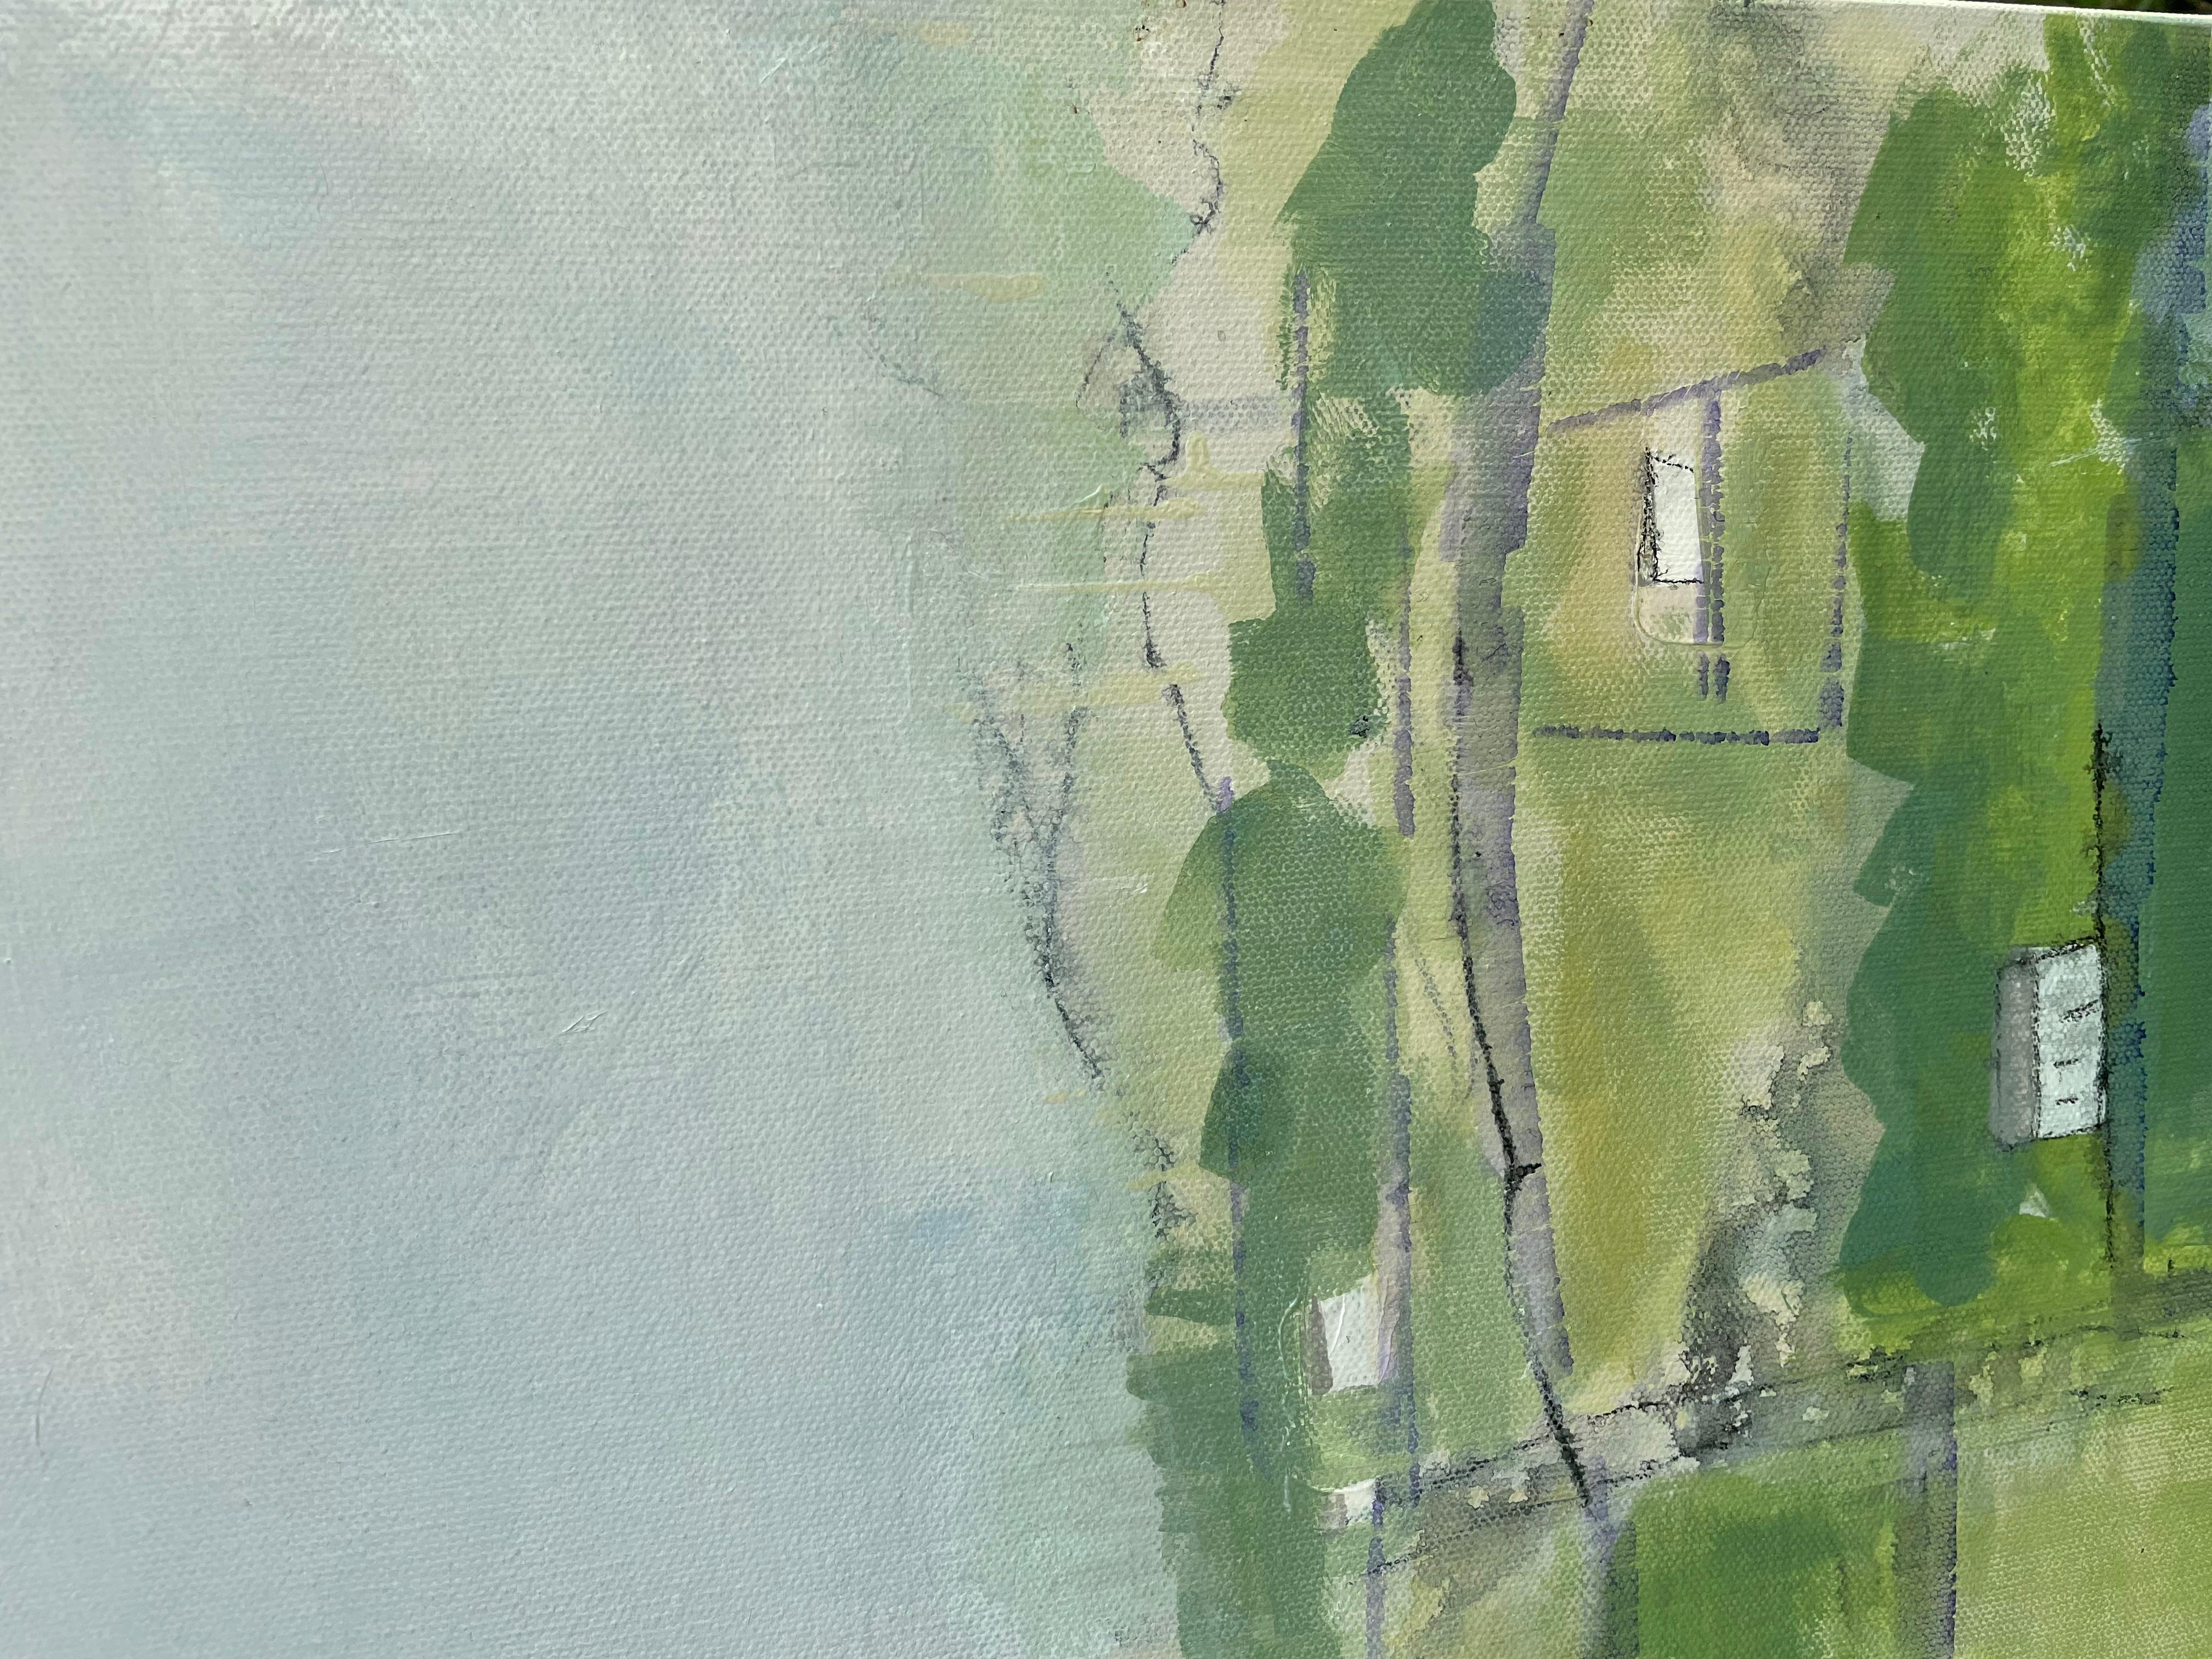 <p>Artist Comments<br>Artist Pat Forbes displays a gentle aerial view of a quaint Irish suburb. Gridded areas of land form a structured landscape. She weaves the different zones together like a green living quilt. The town flows over gentle hills